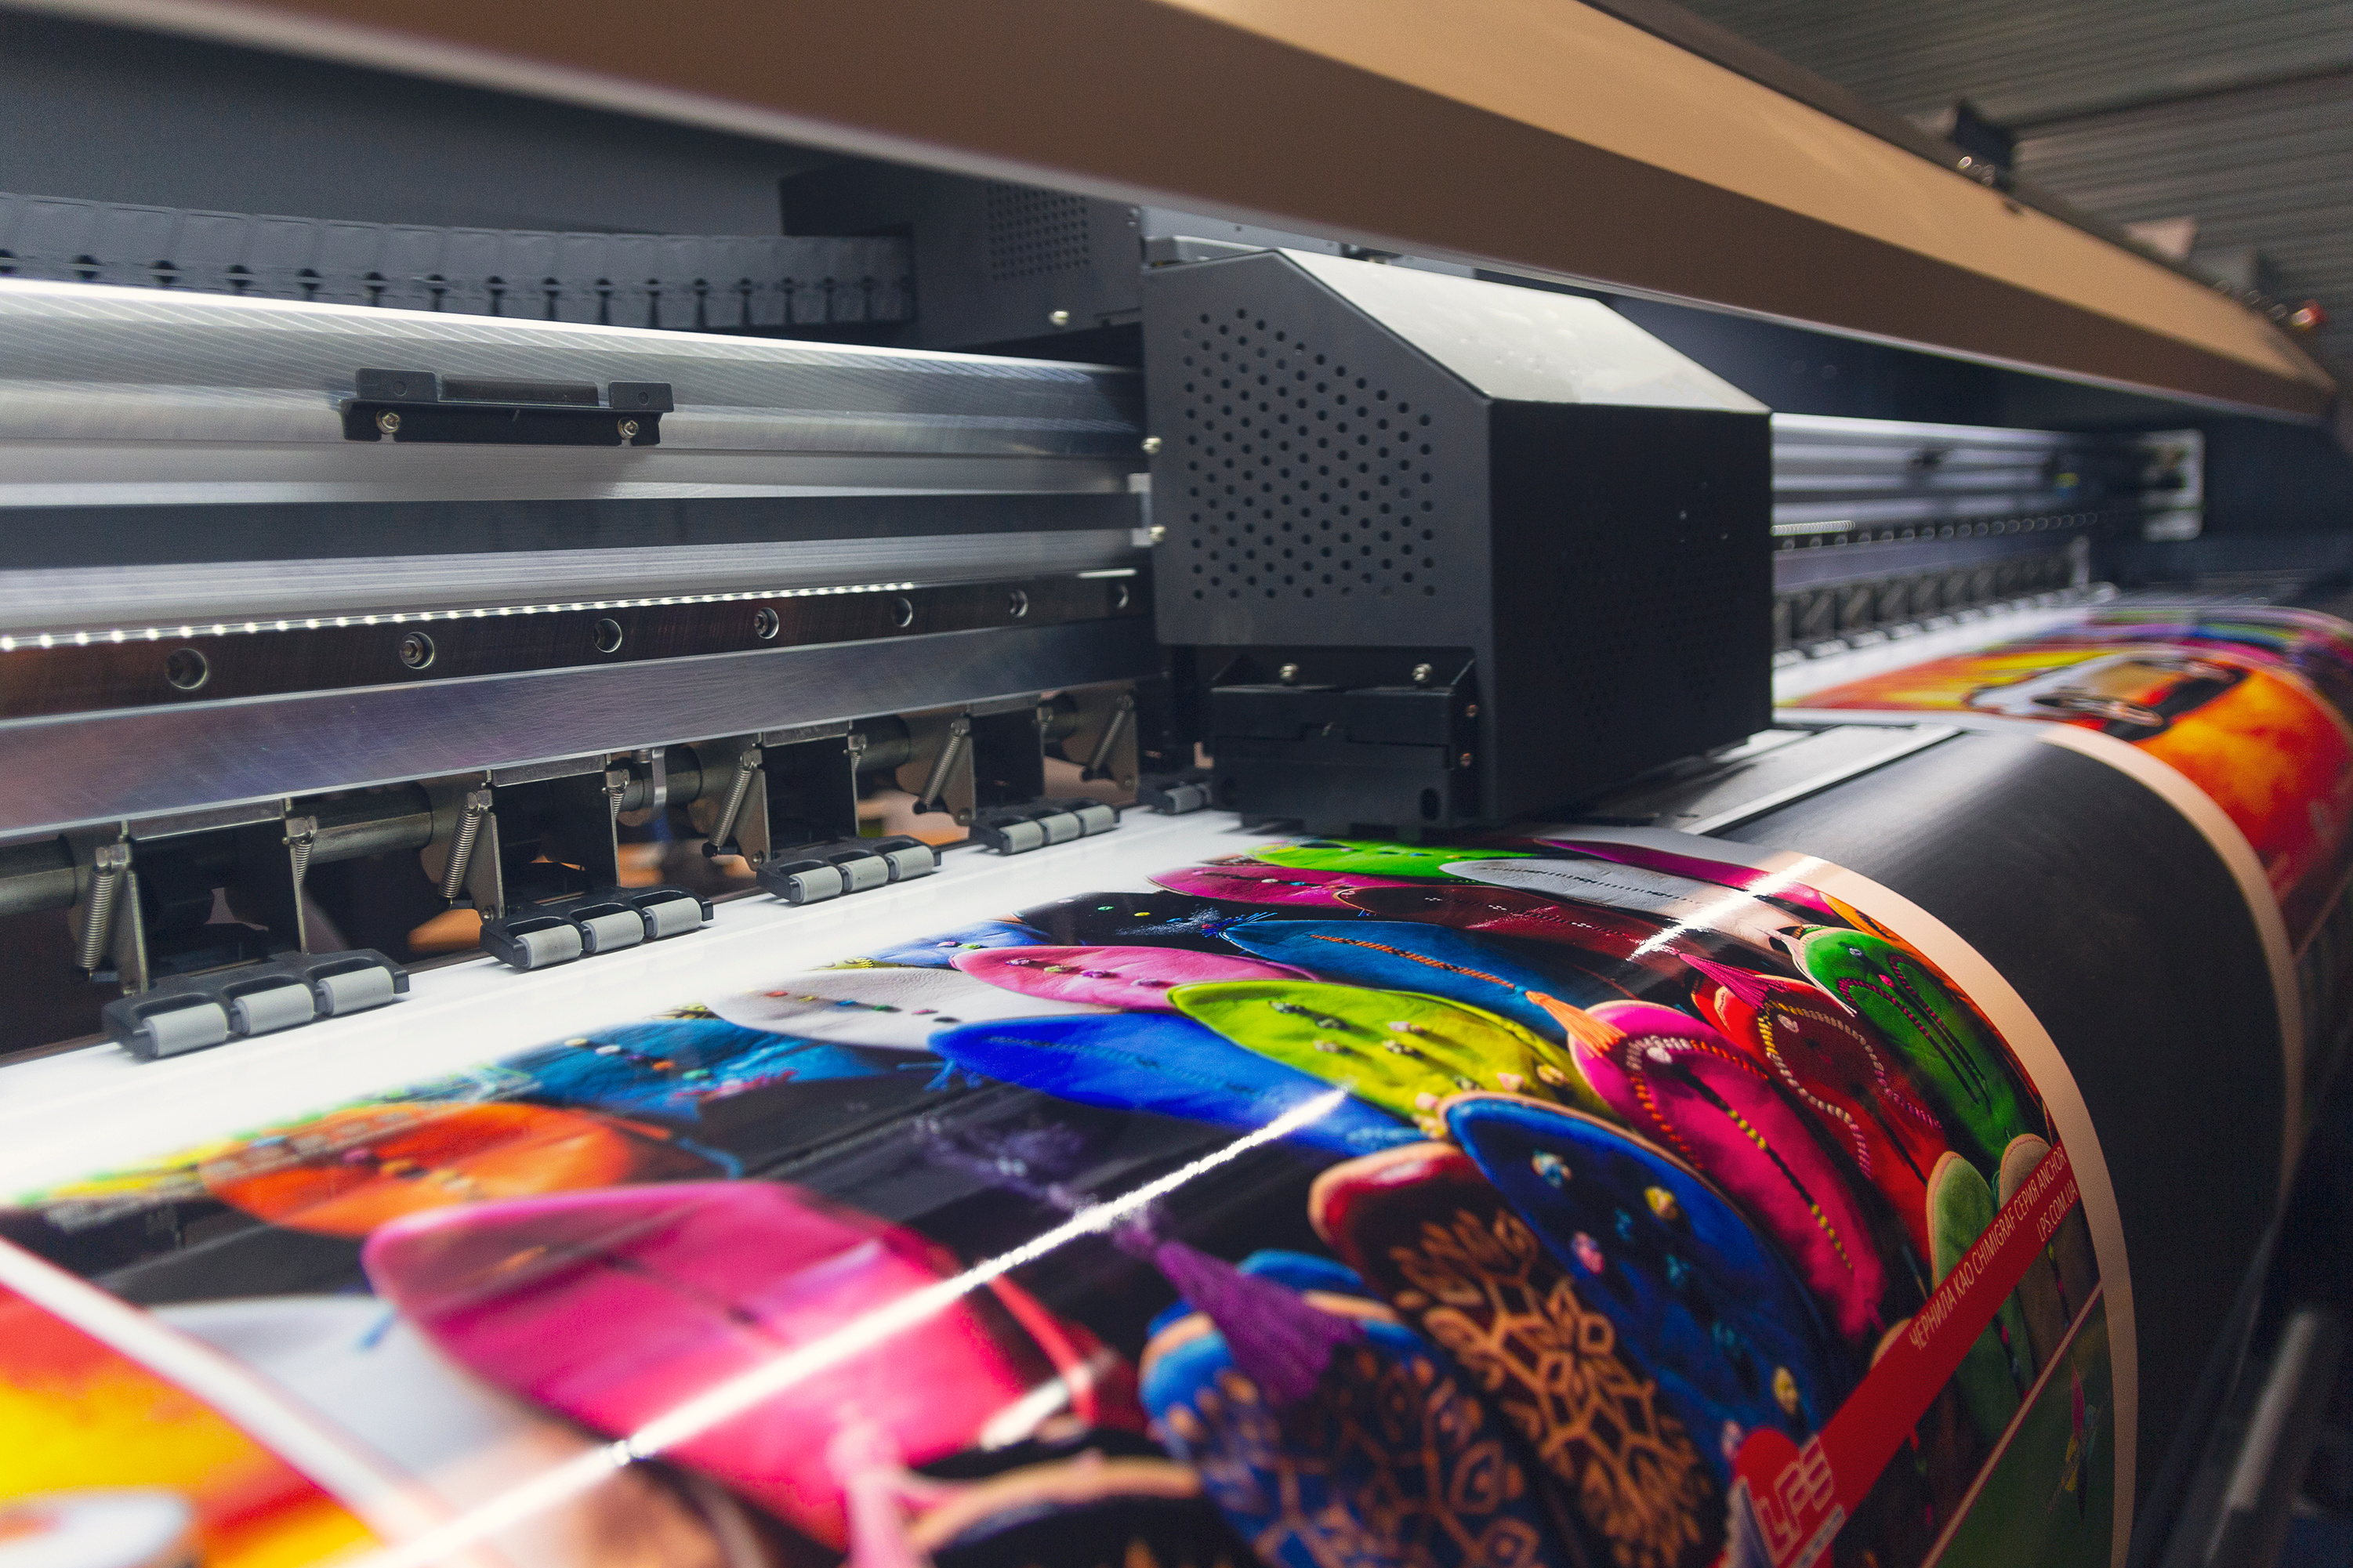 A printer producing high-quality, color digital prints on glossy paper.